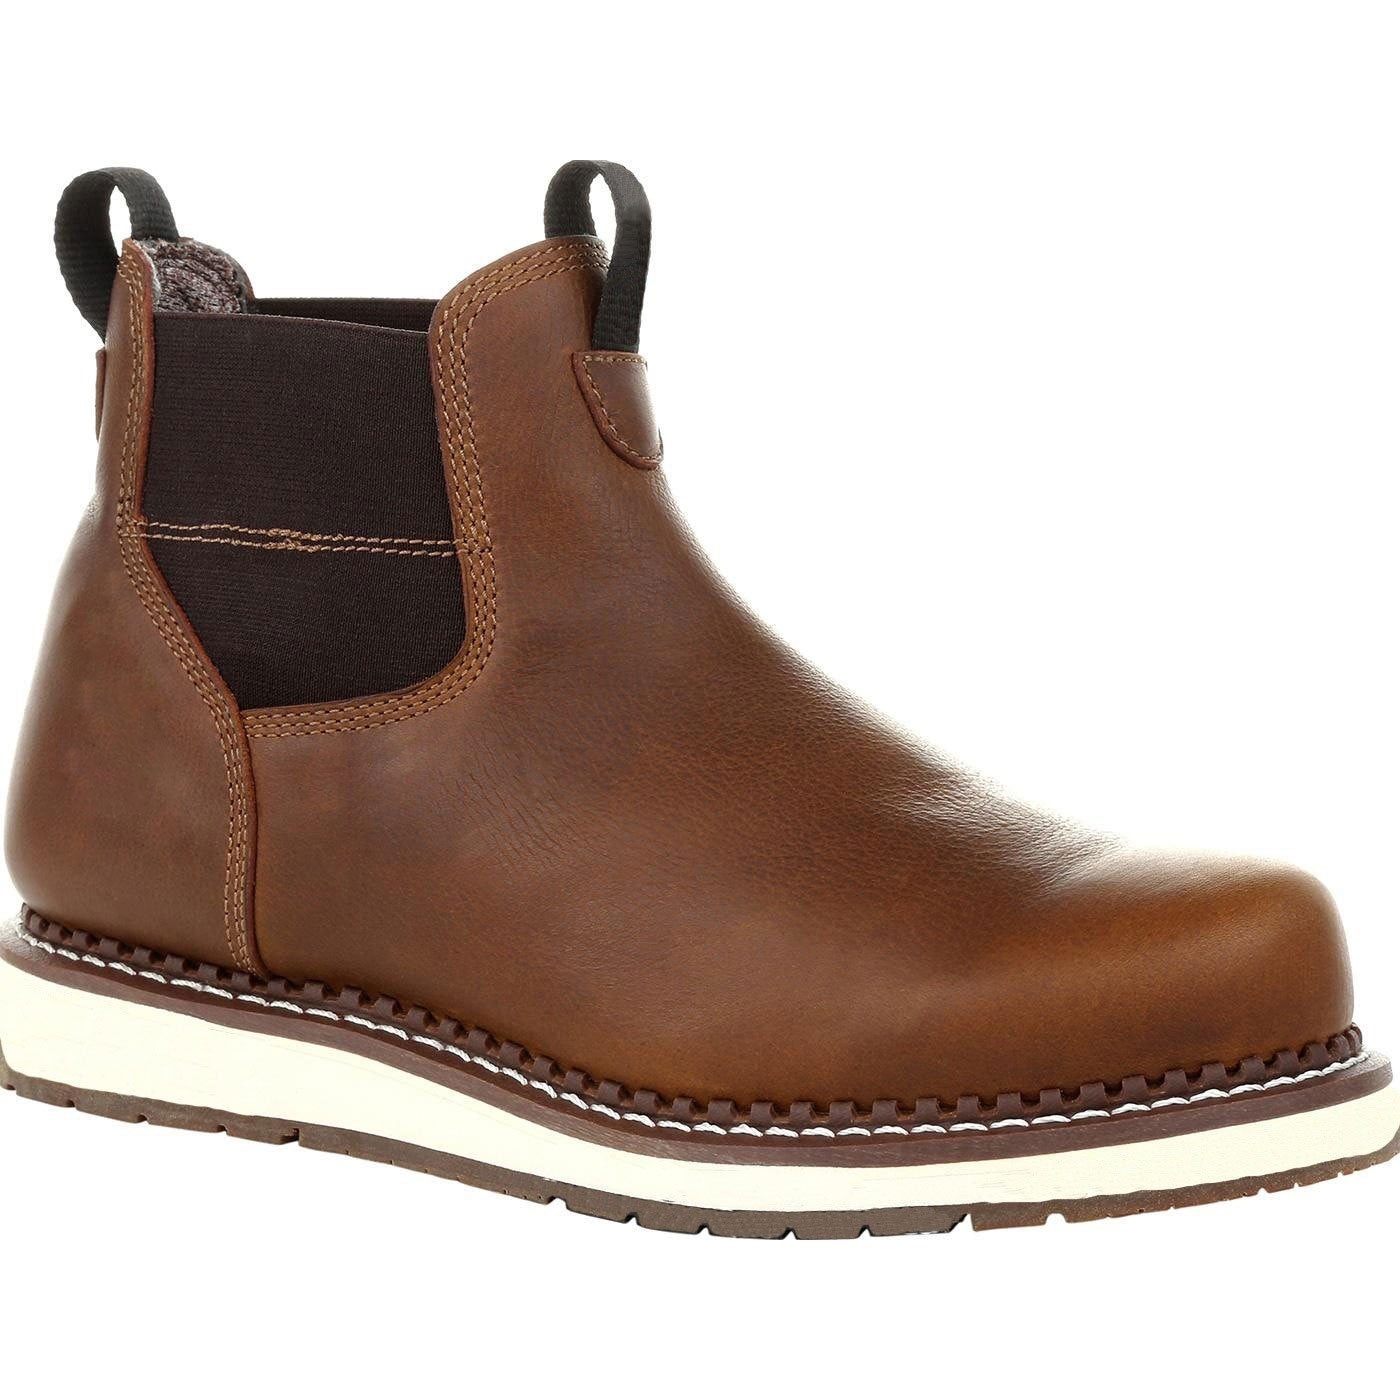 New Edition - Waterproof Chelsea Wedge Work Boots for Men